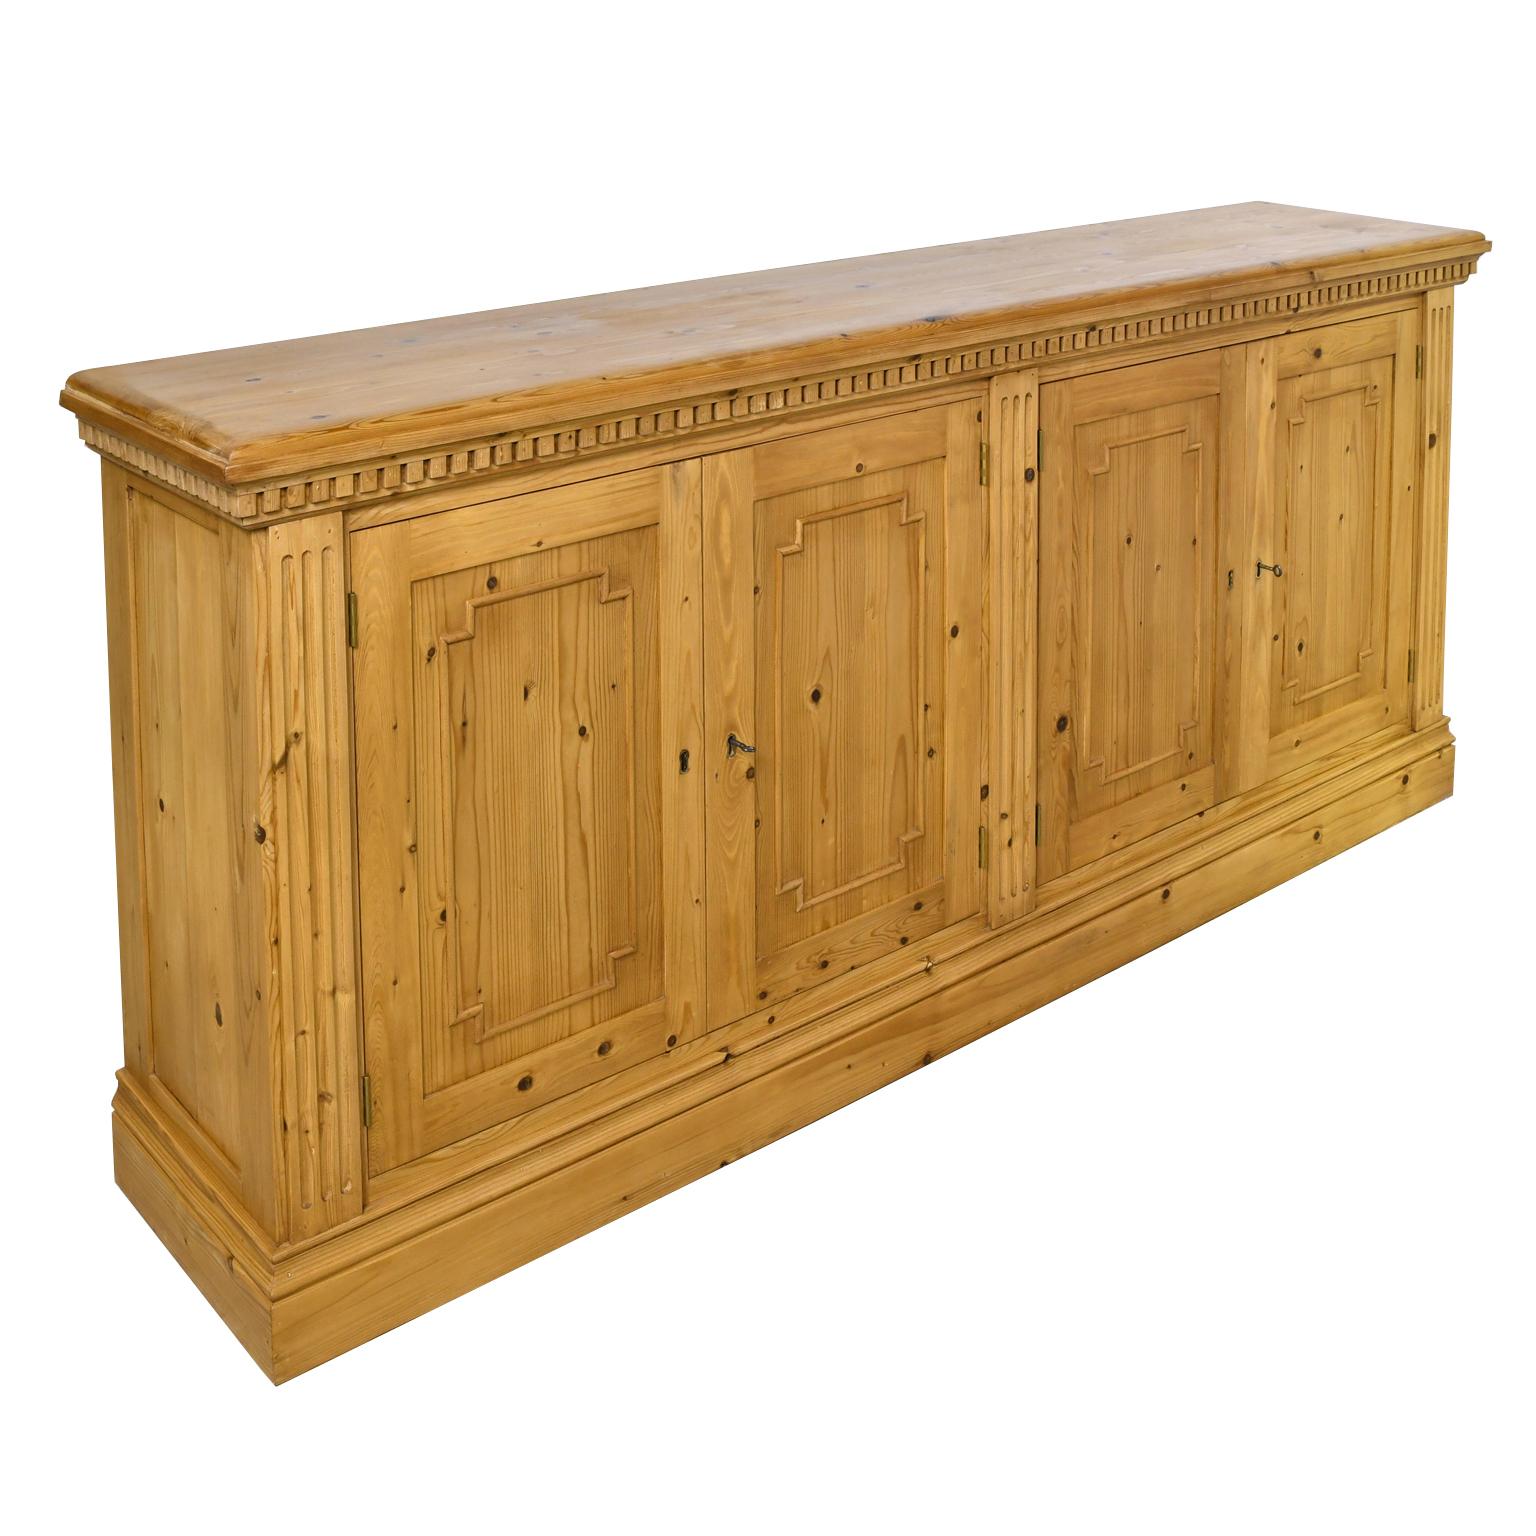 Bonnin Ashley Custom-Made English-Style Sideboard / Credenza in Repurposed Pine For Sale 2